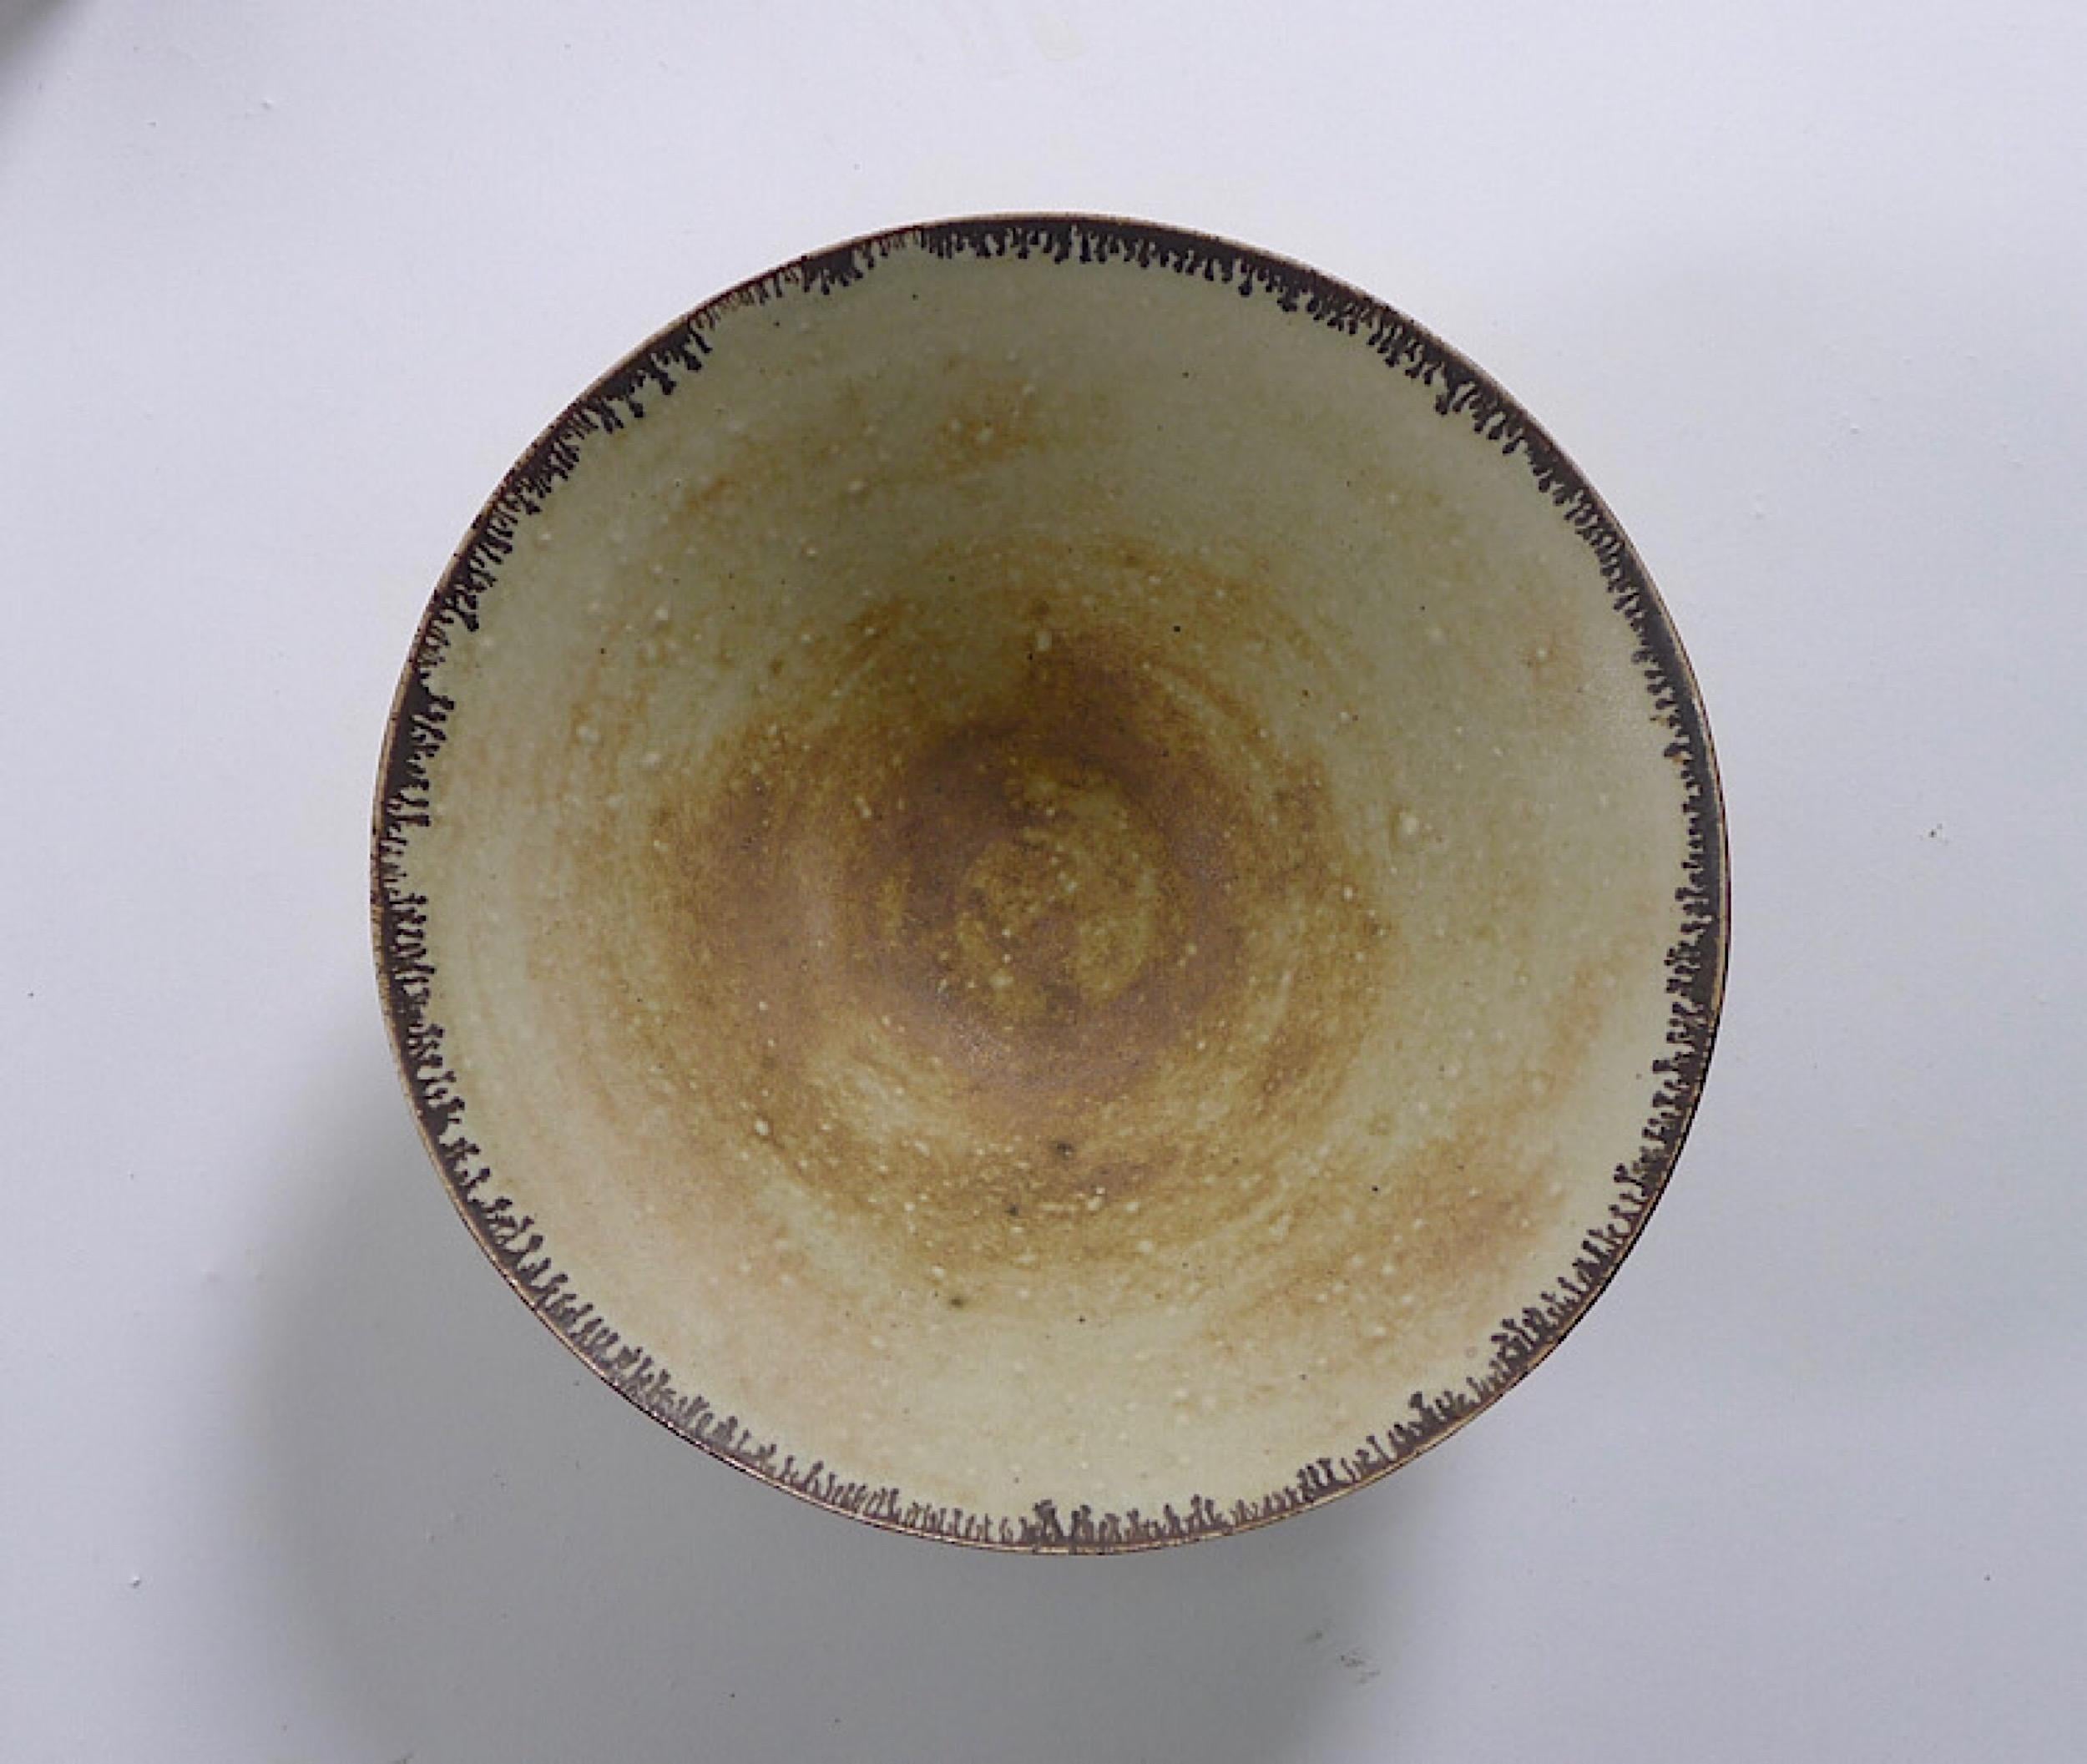 Lucie Rie, Porcelain Bowl, Flaring Conical Form, Impressed Seal Mark 2